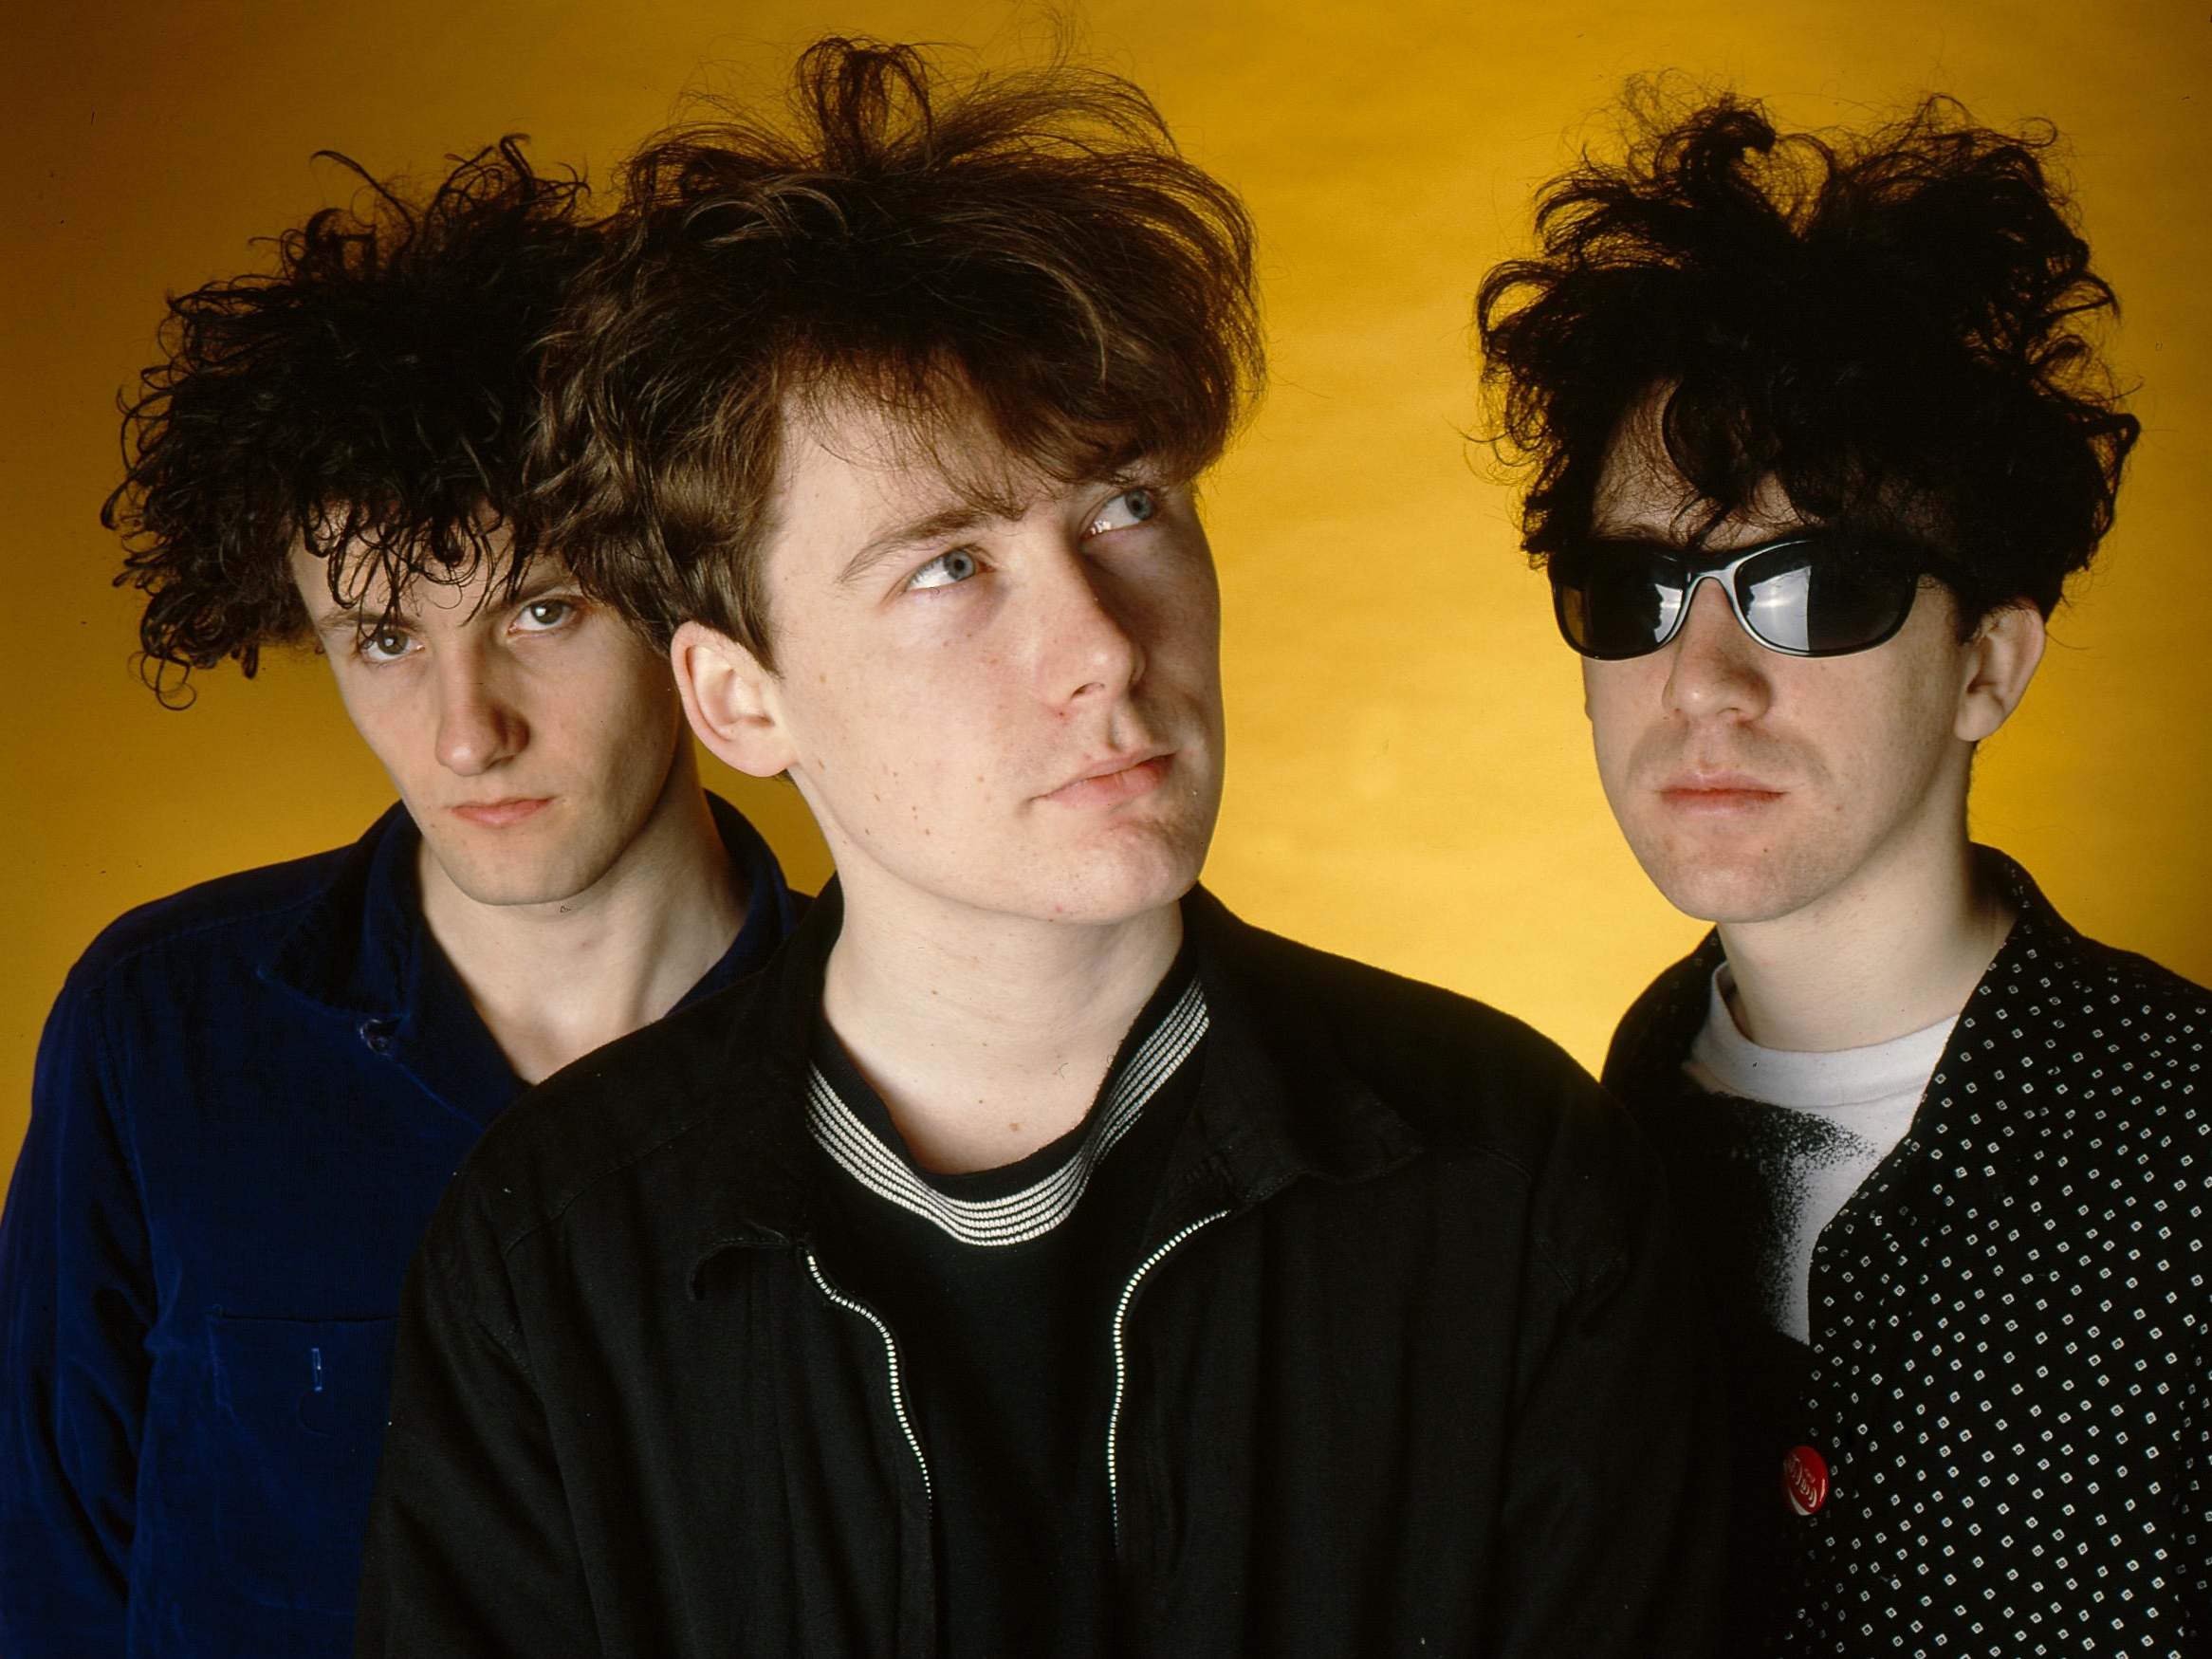 Scottish alternative rock band The Jesus and Mary Chain were huge in the Eighties